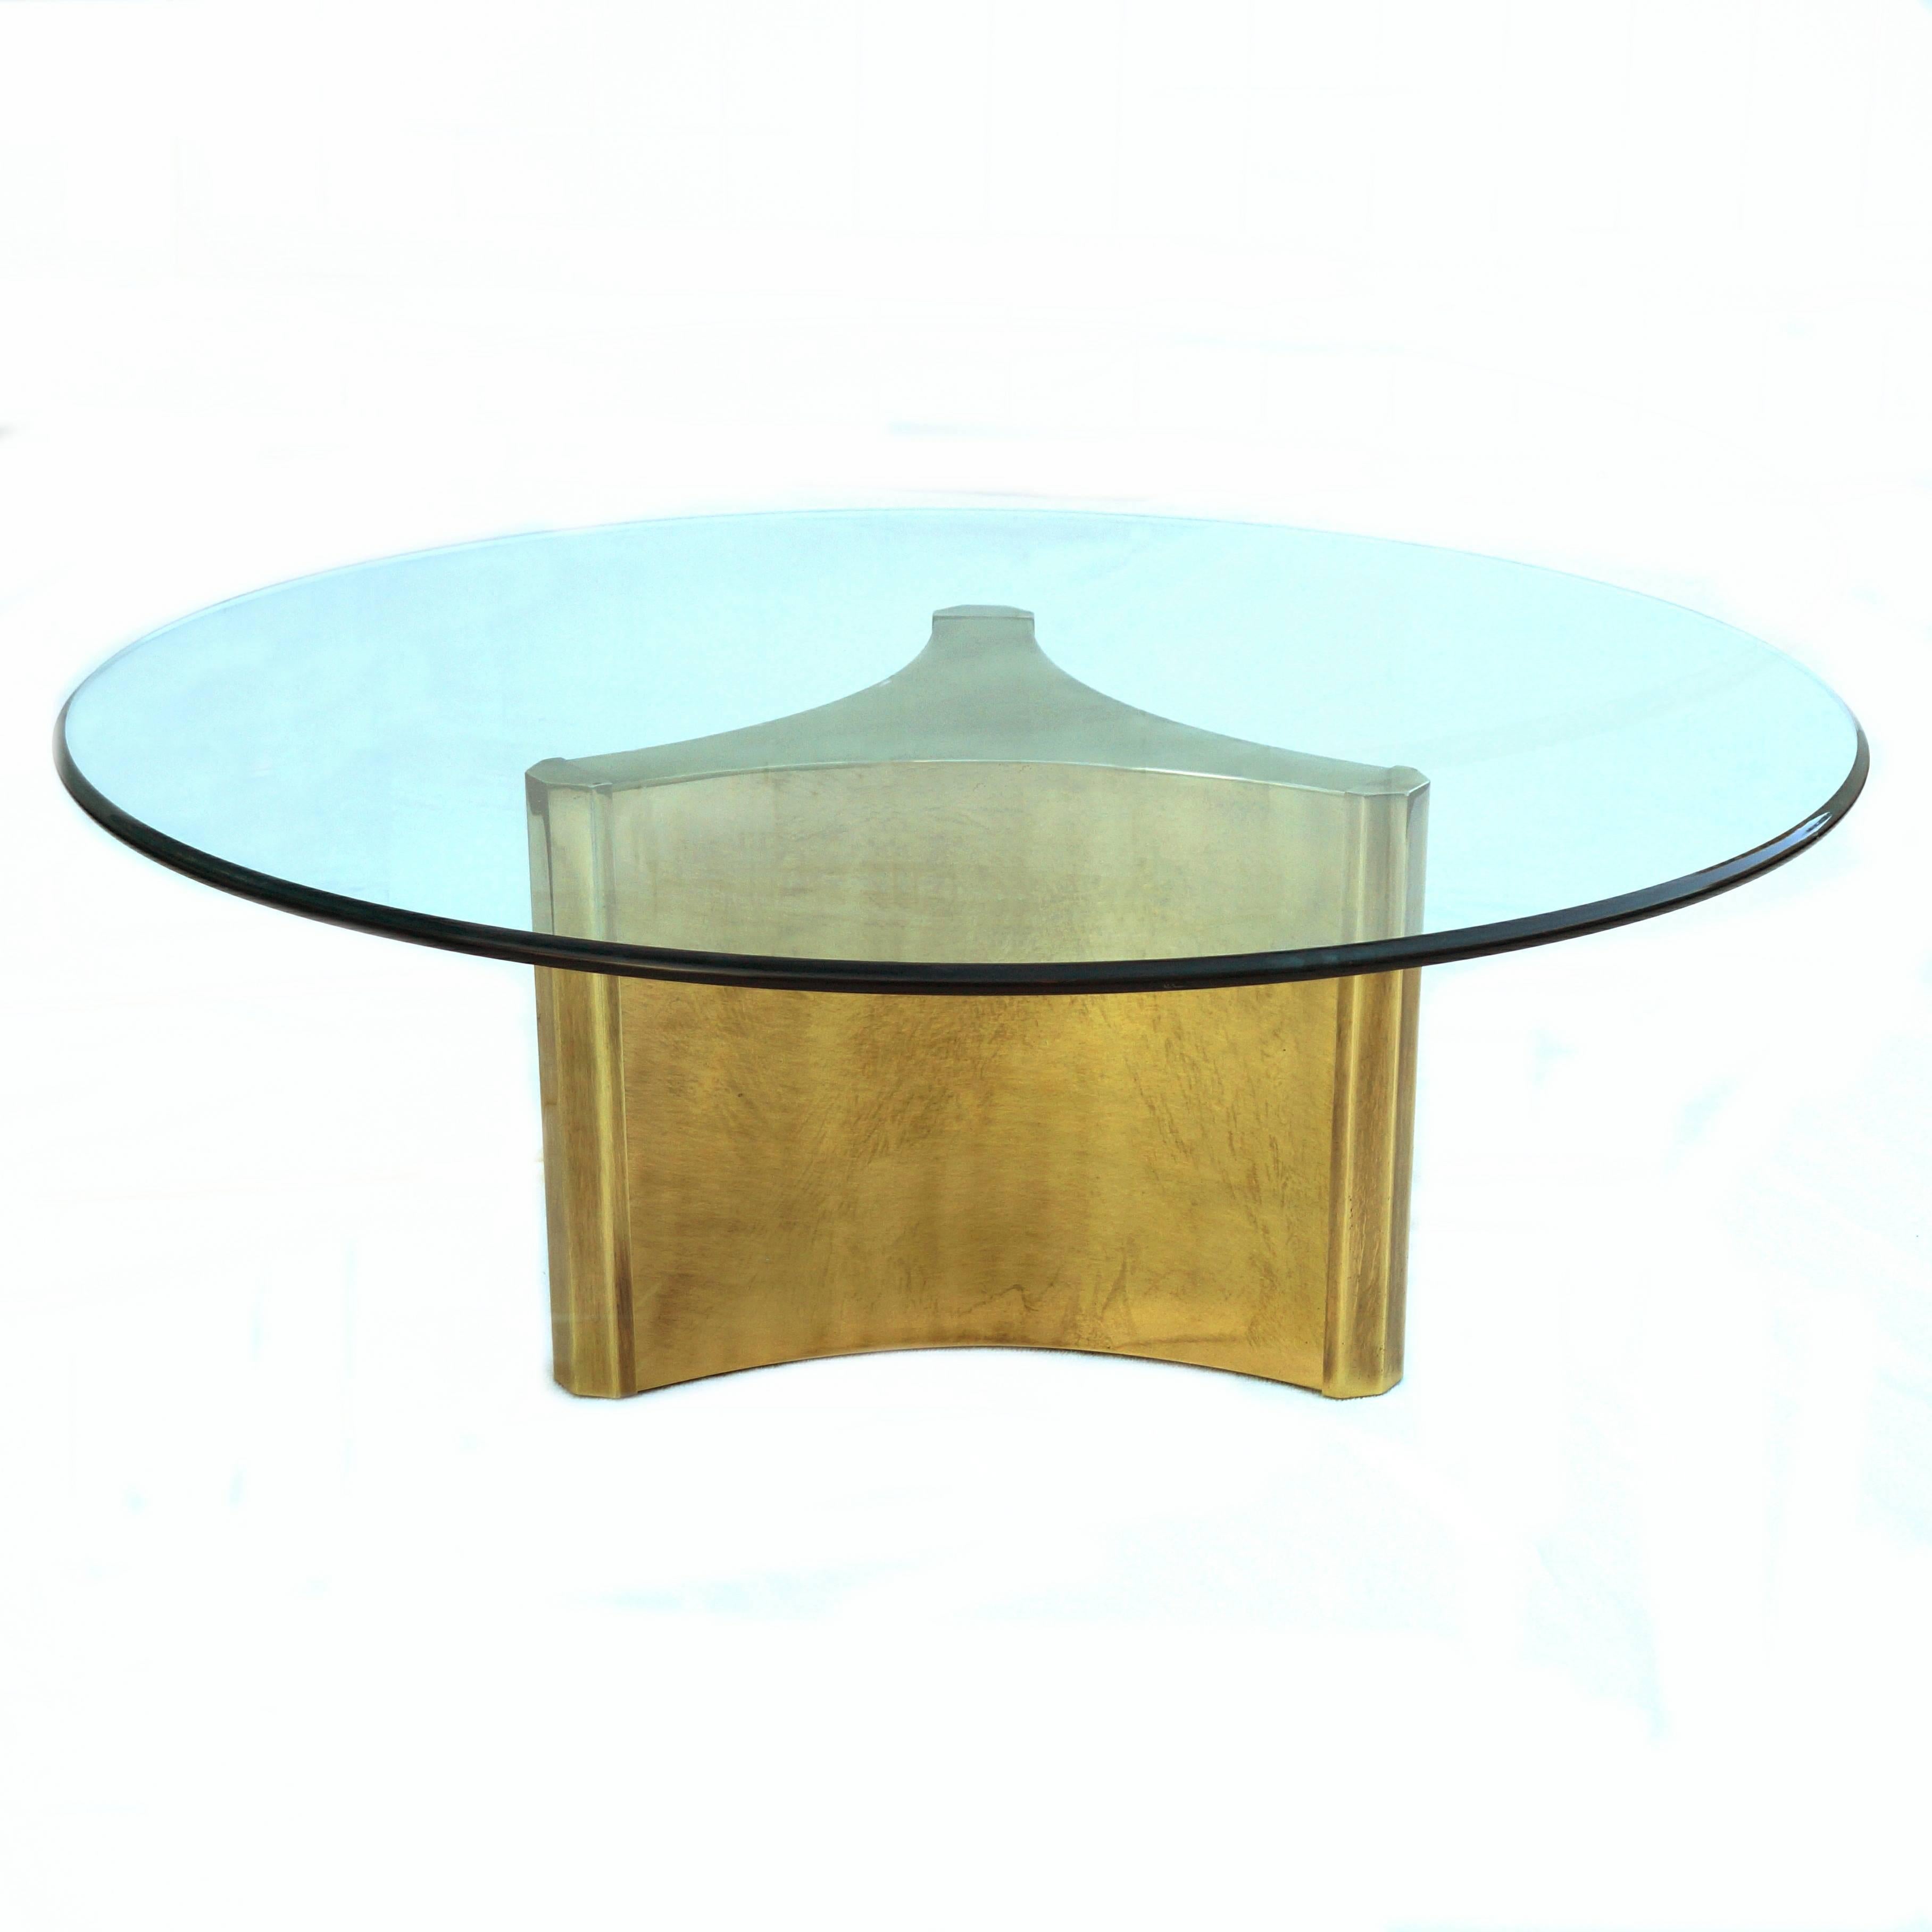 Unusual Mastercraft Pedestal Coffee Table. The base measures approx. 15.25